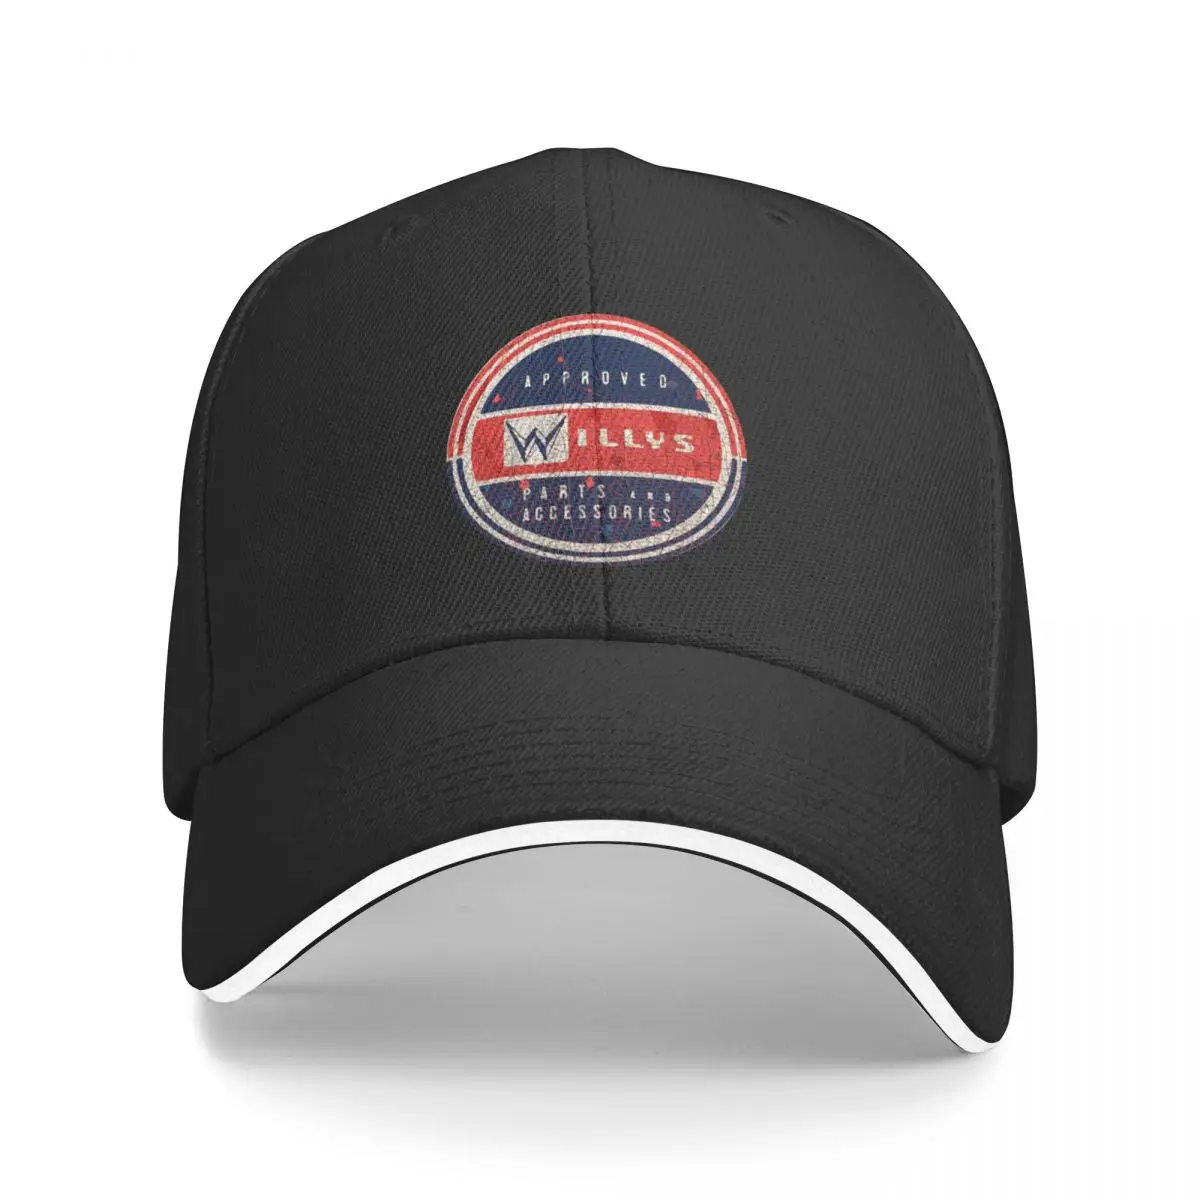 

Willys Parts and service sign USA Baseball Cap Luxury Cap beach hat Beach Outing Men's Baseball Women's